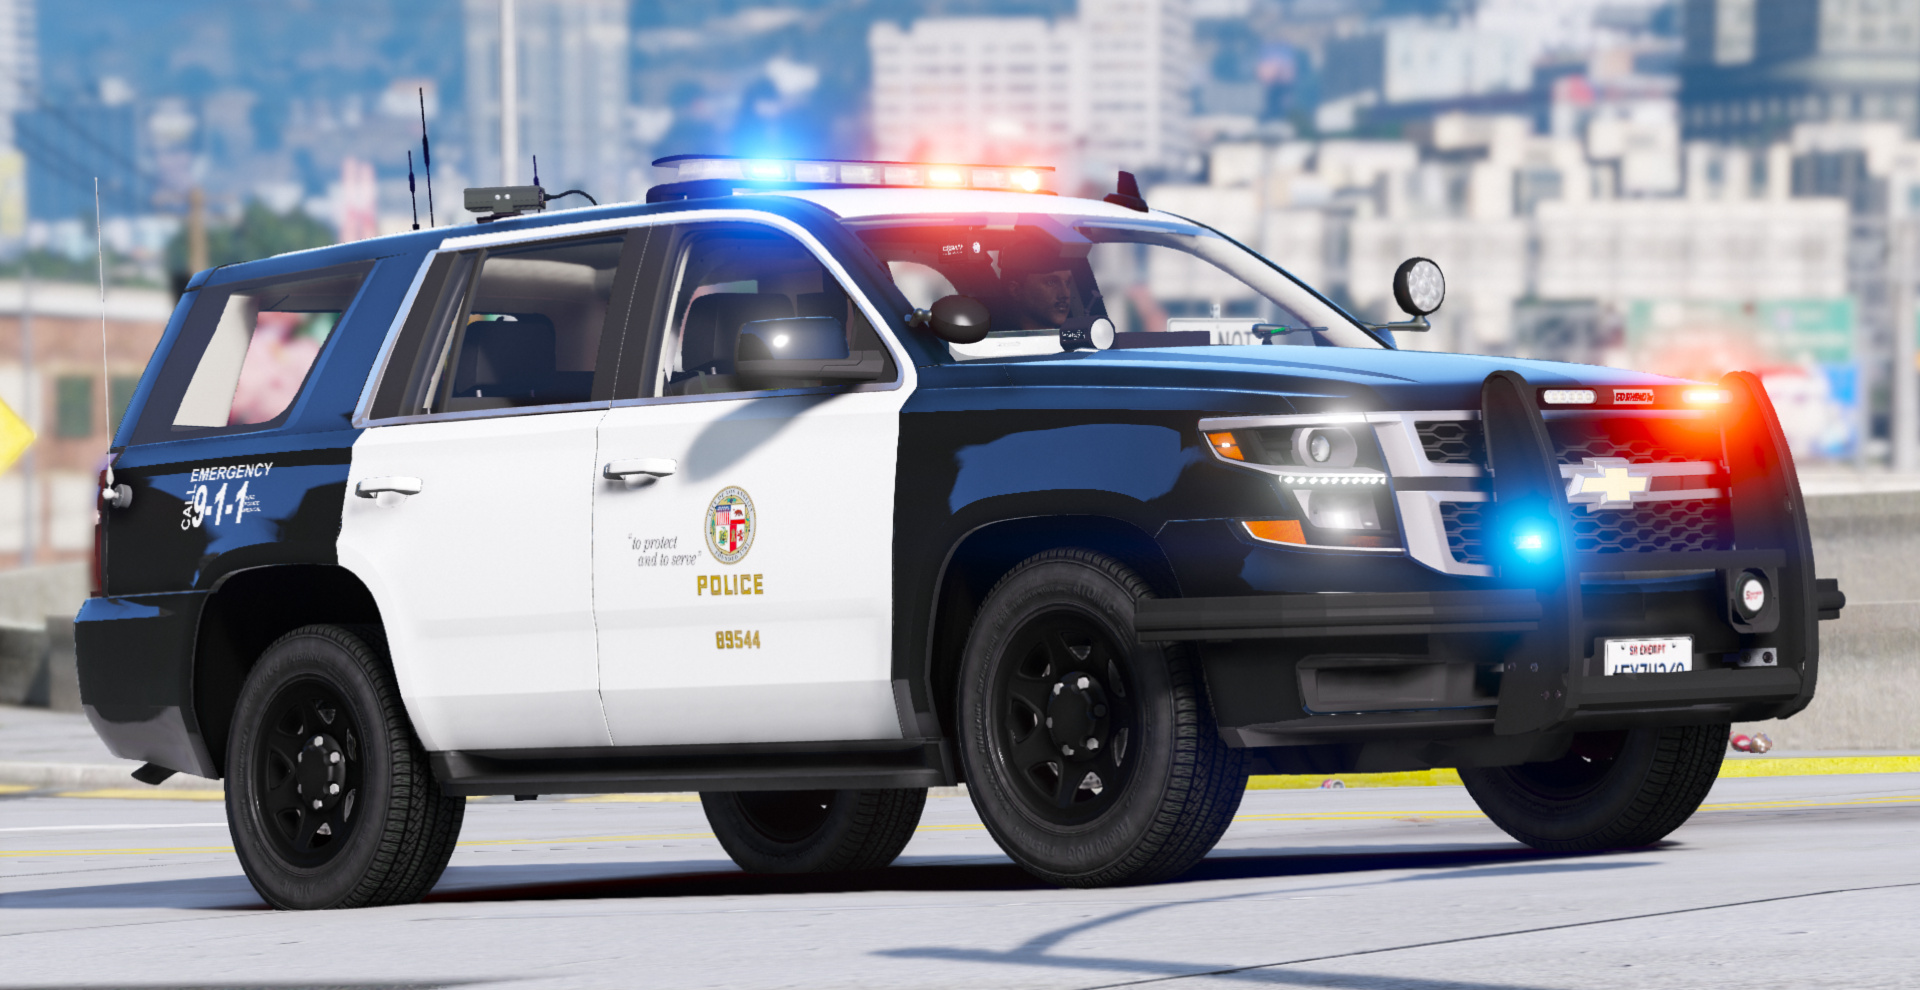 LAPD Texture Pack UPDATED - Releases - Cfx.re Community